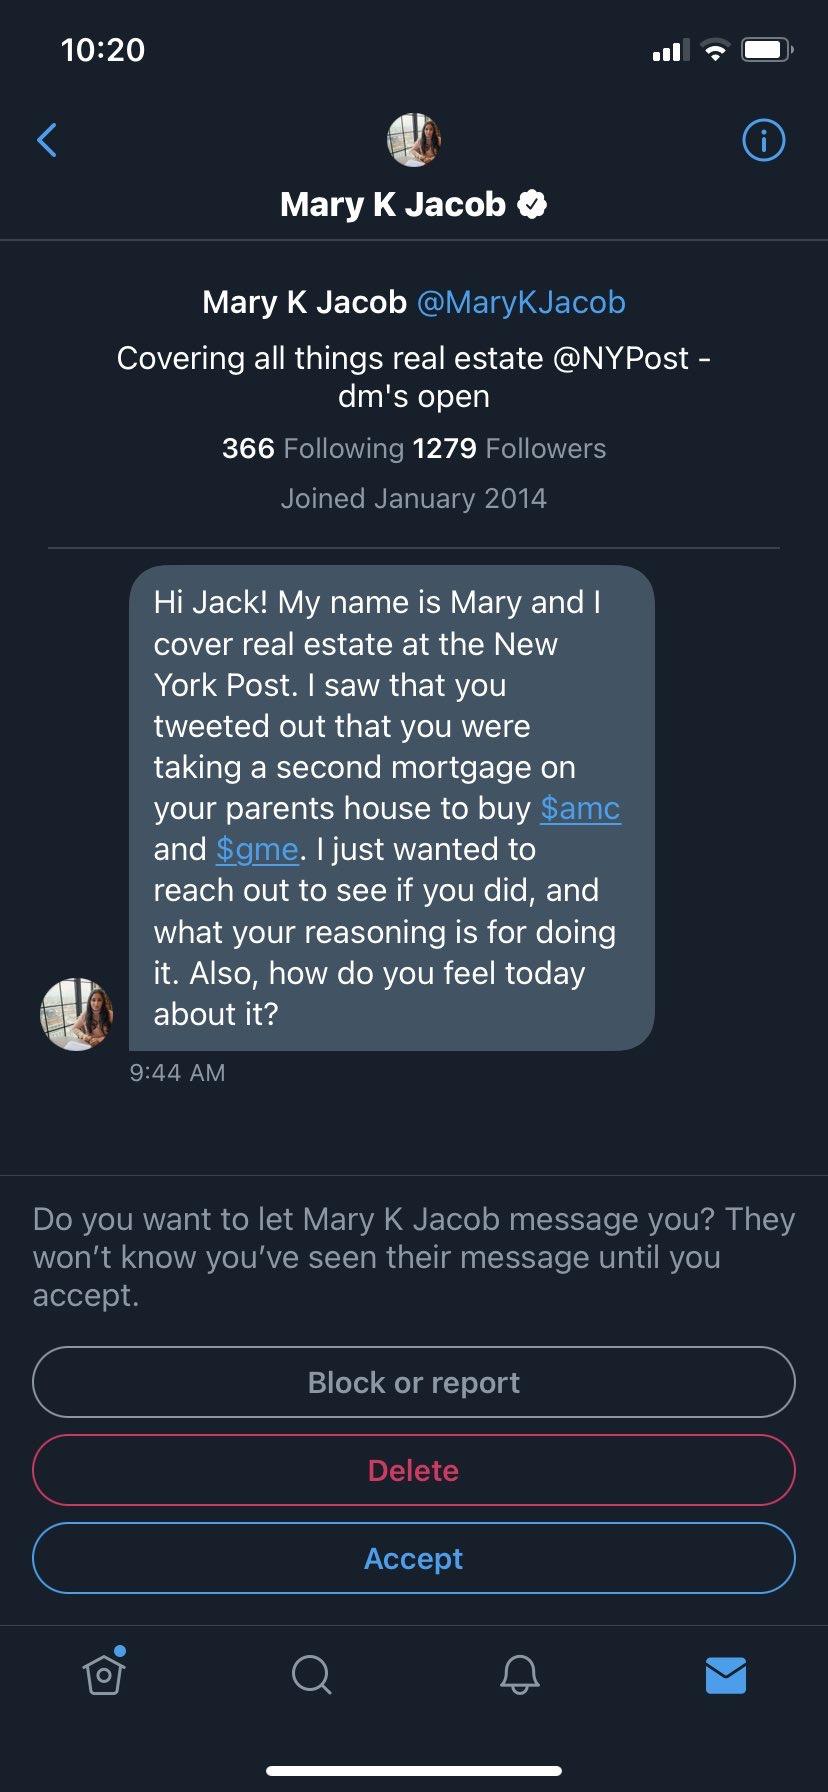 screenshot - . . Mary K Jacob Mary K Jacob Covering all things real estate dm's open 366 ing 1279 ers Joined Hi Jack! My name is Mary and I cover real estate at the New York Post. I saw that you tweeted out that you were taking a second mortgage on your p